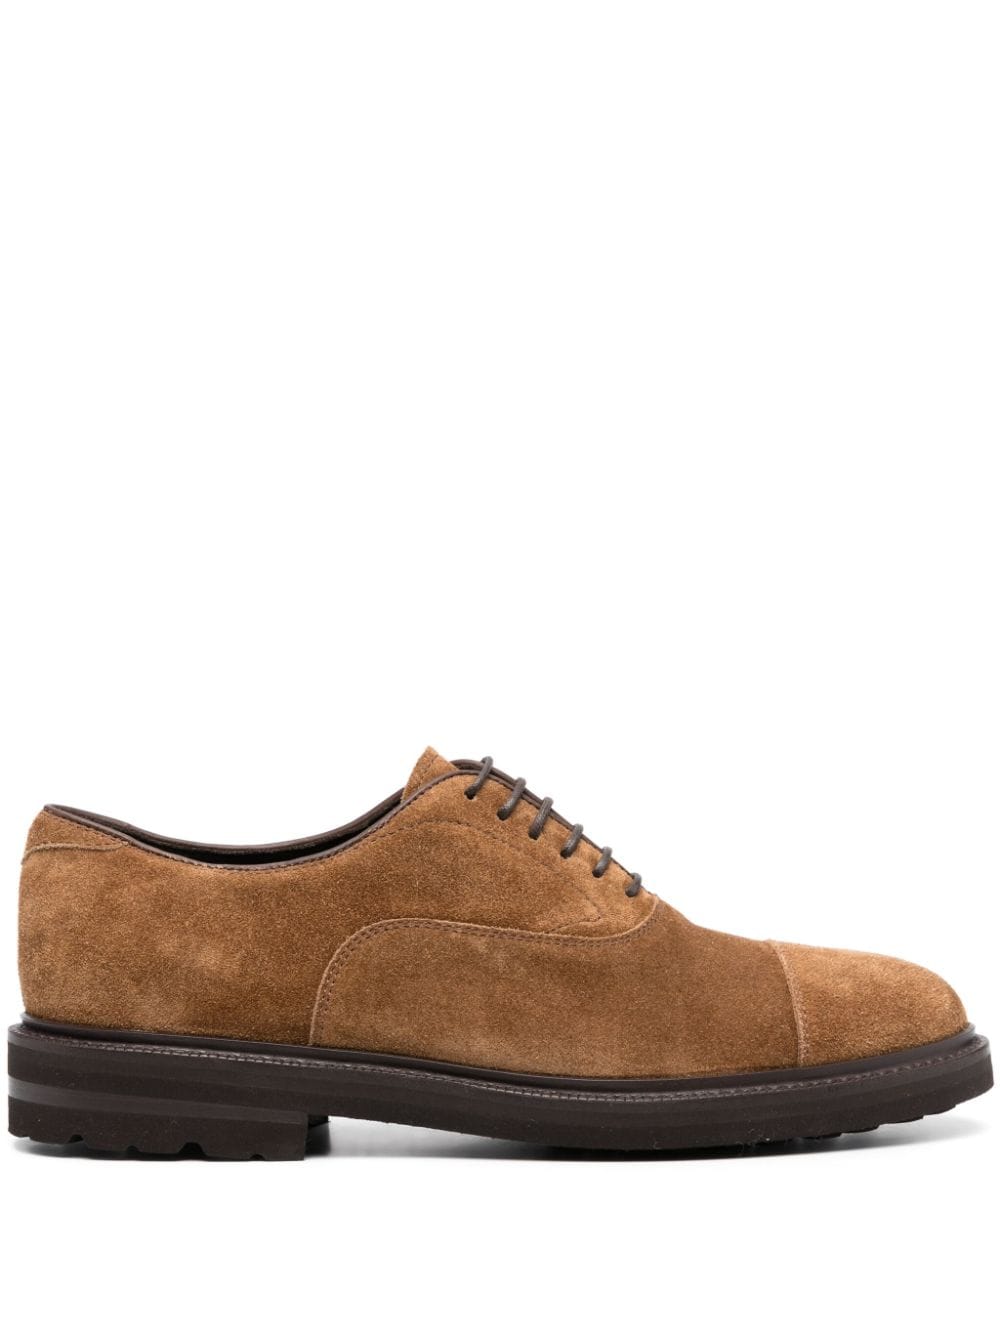 Henderson Baracco lace-up suede oxford shoes - Brown von Henderson Baracco